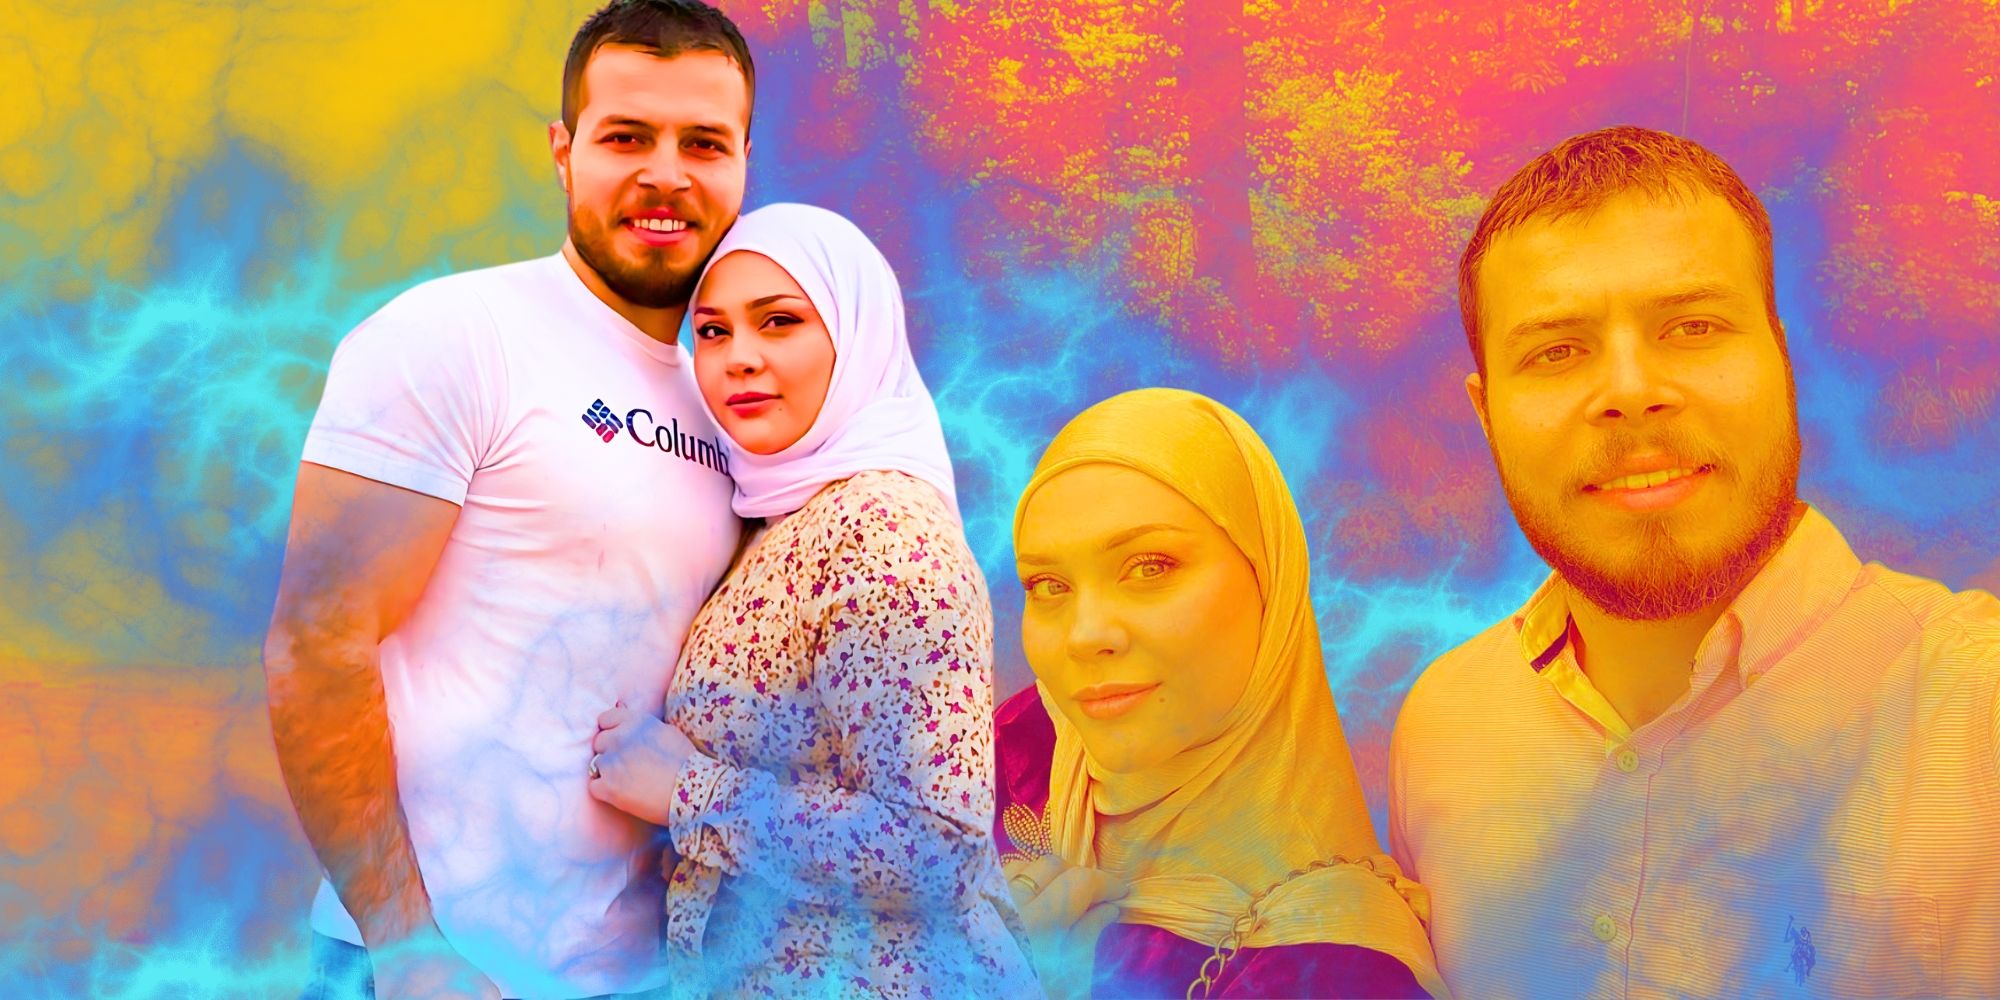 Omar Albakour wearing white tshirt & Avery Mills wearing hijab from 90 Day Fiancé: Before the 90 Days Season 3 colorful background